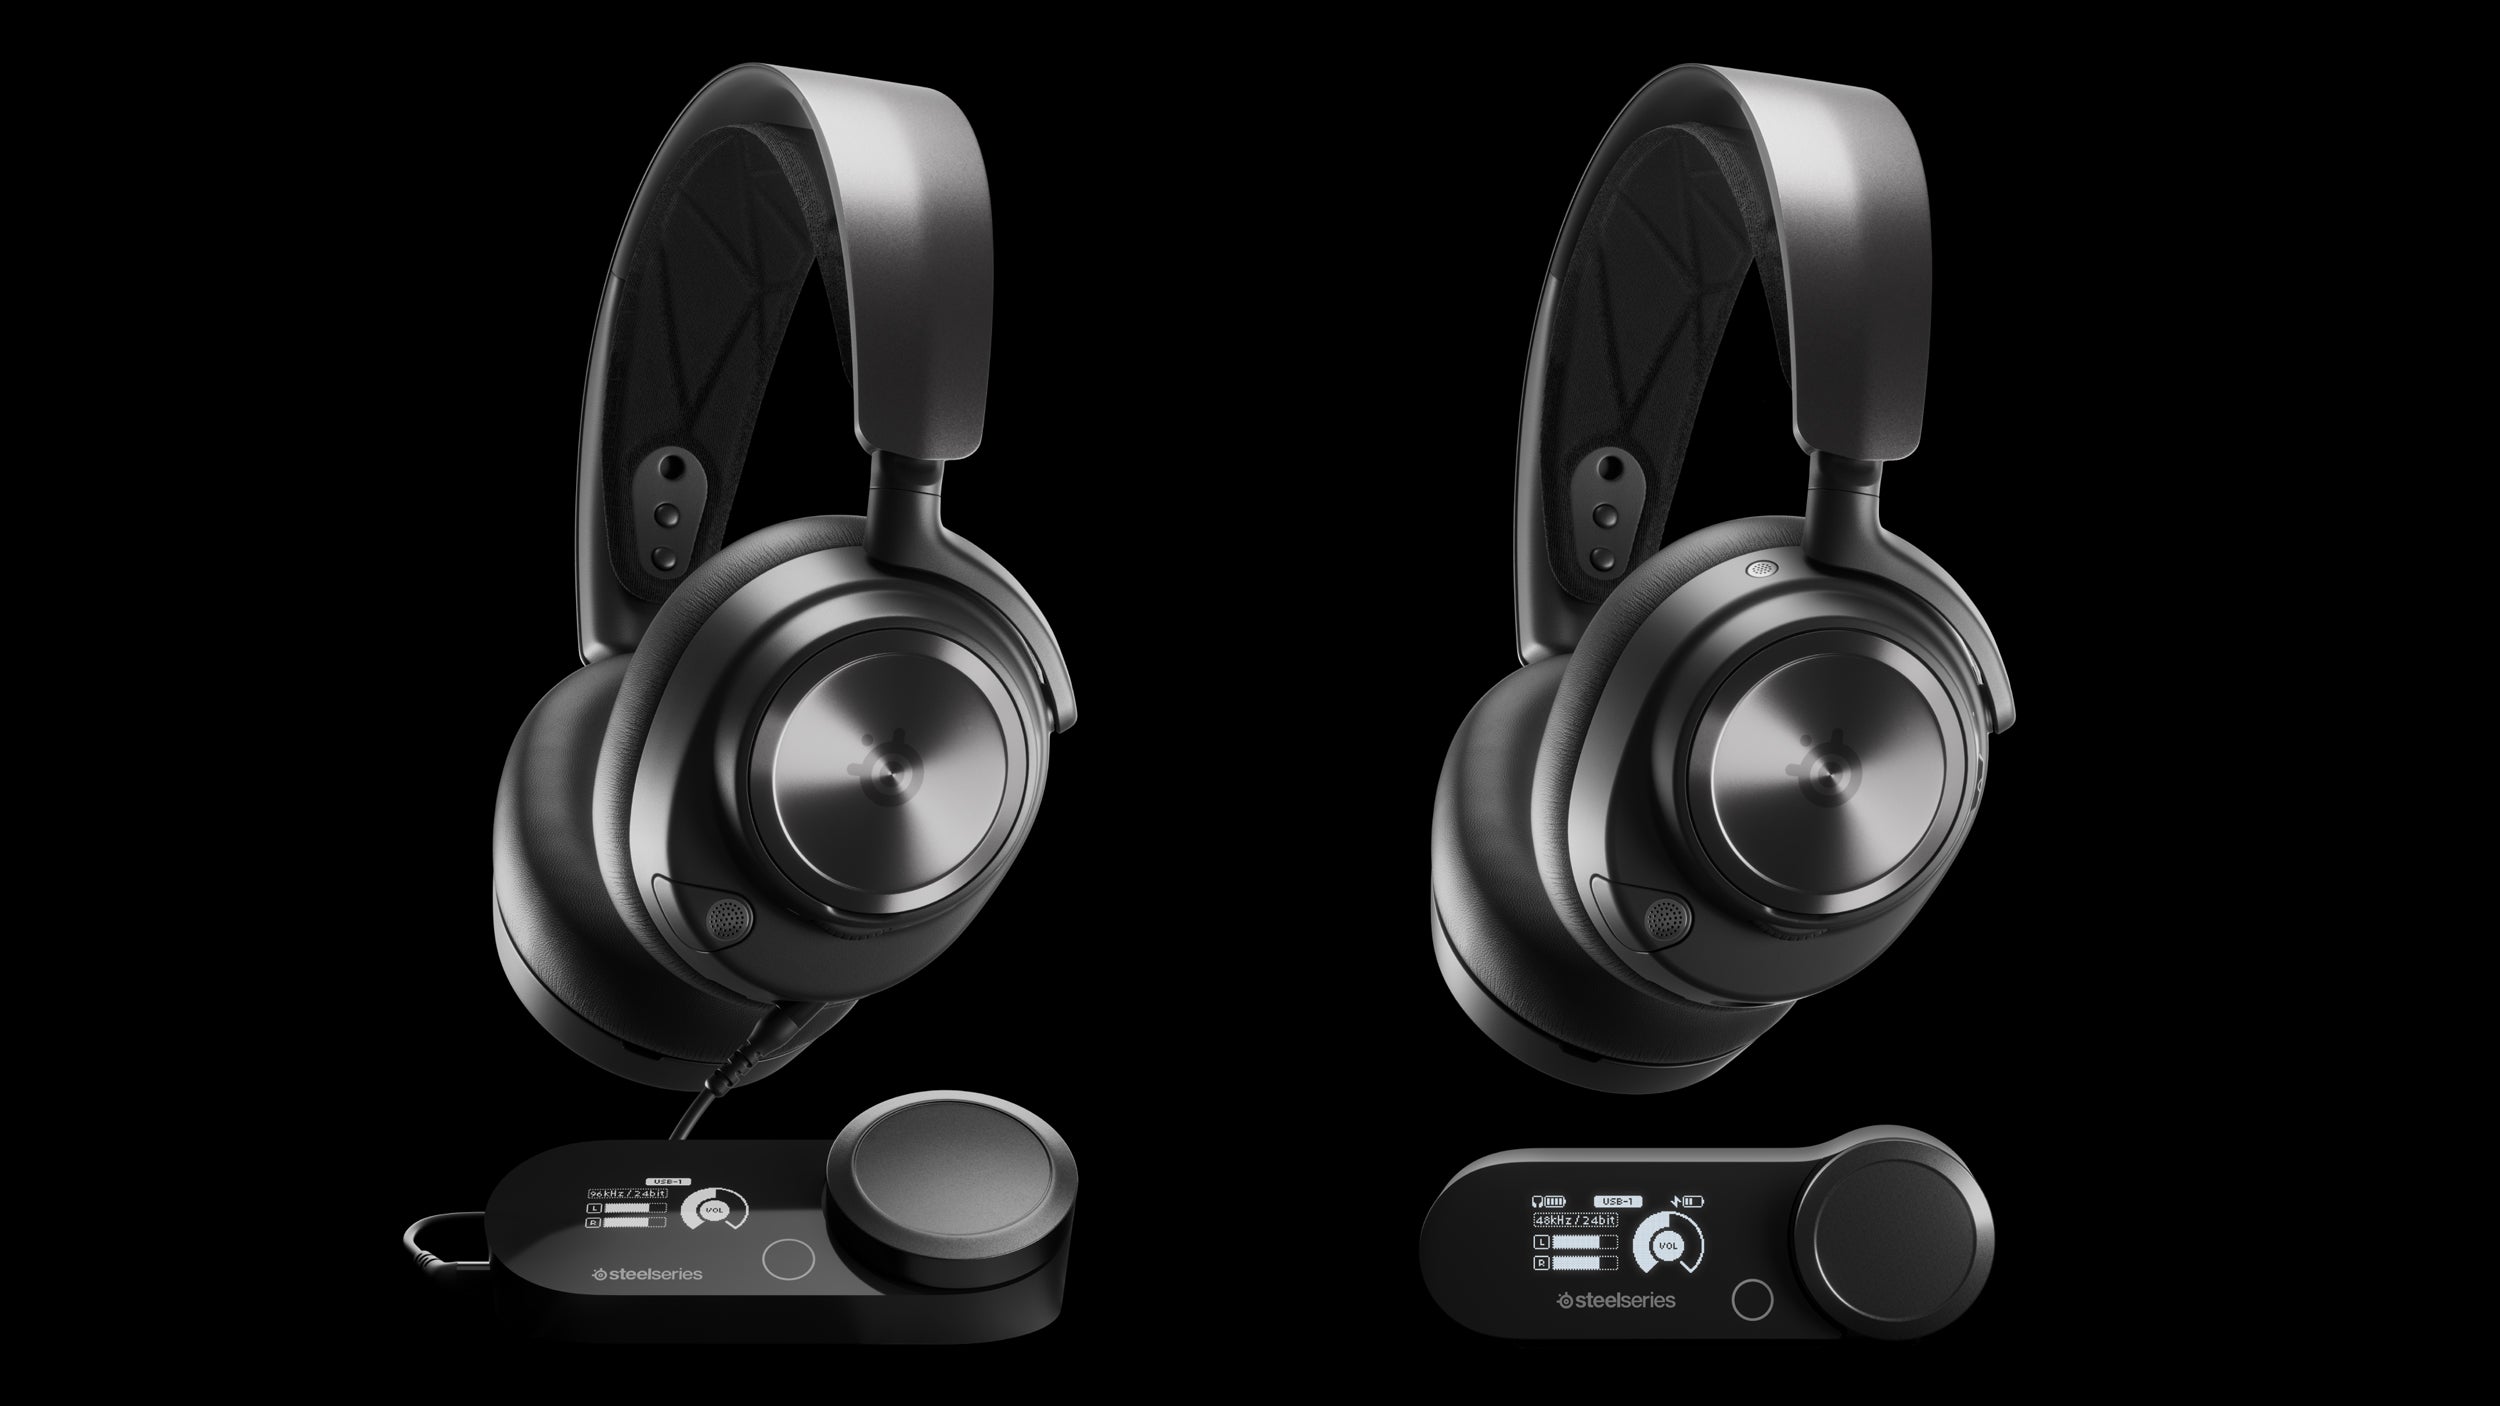 Steelseries’ New Wireless Gaming Headphones Feature Swappable Batteries and a Retractable Microphone